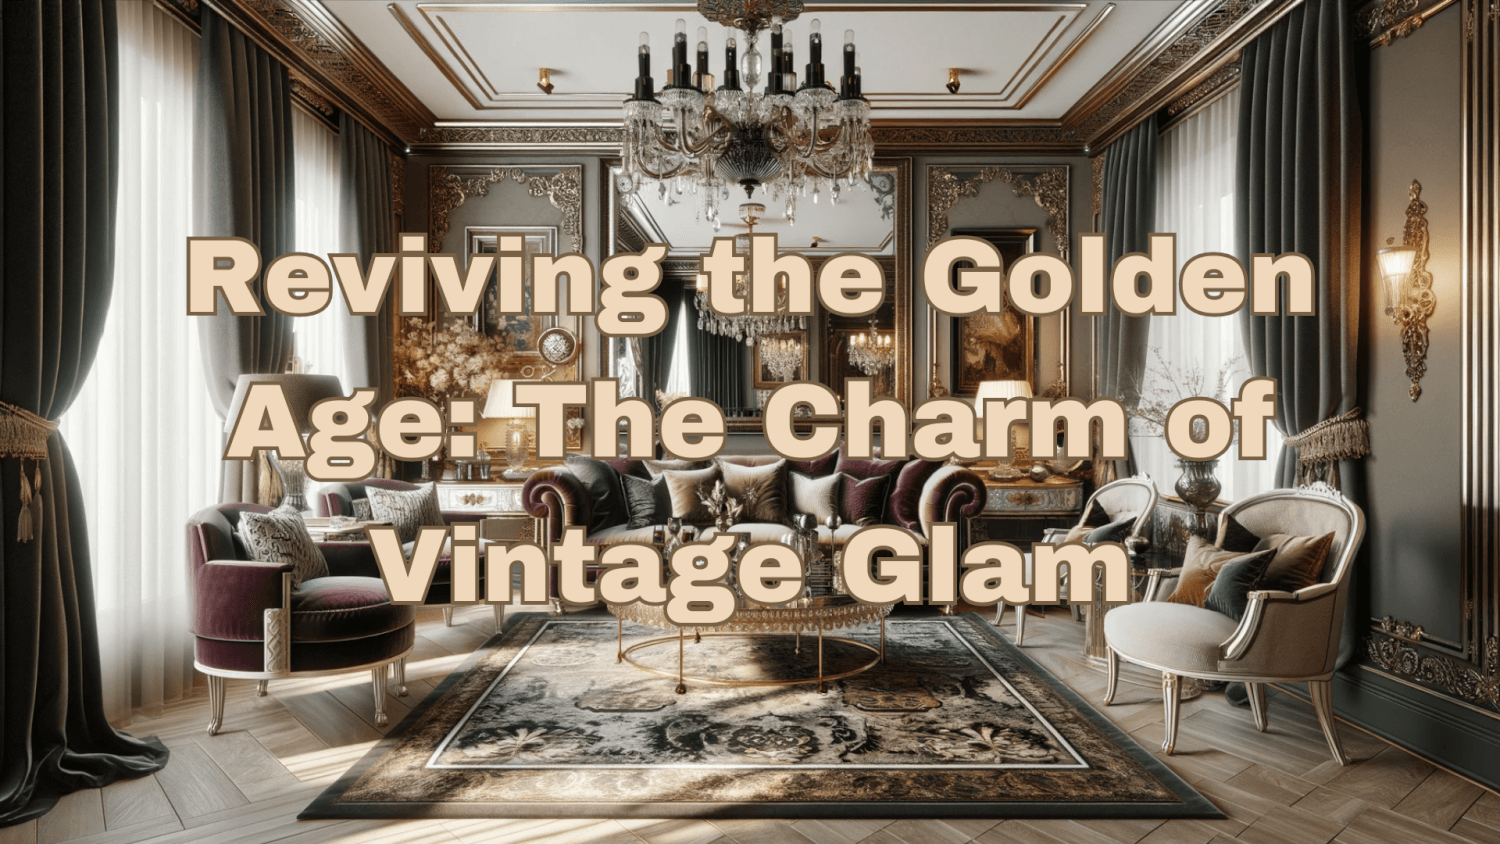 Reviving the Golden Age: The Charm of Vintage Glam